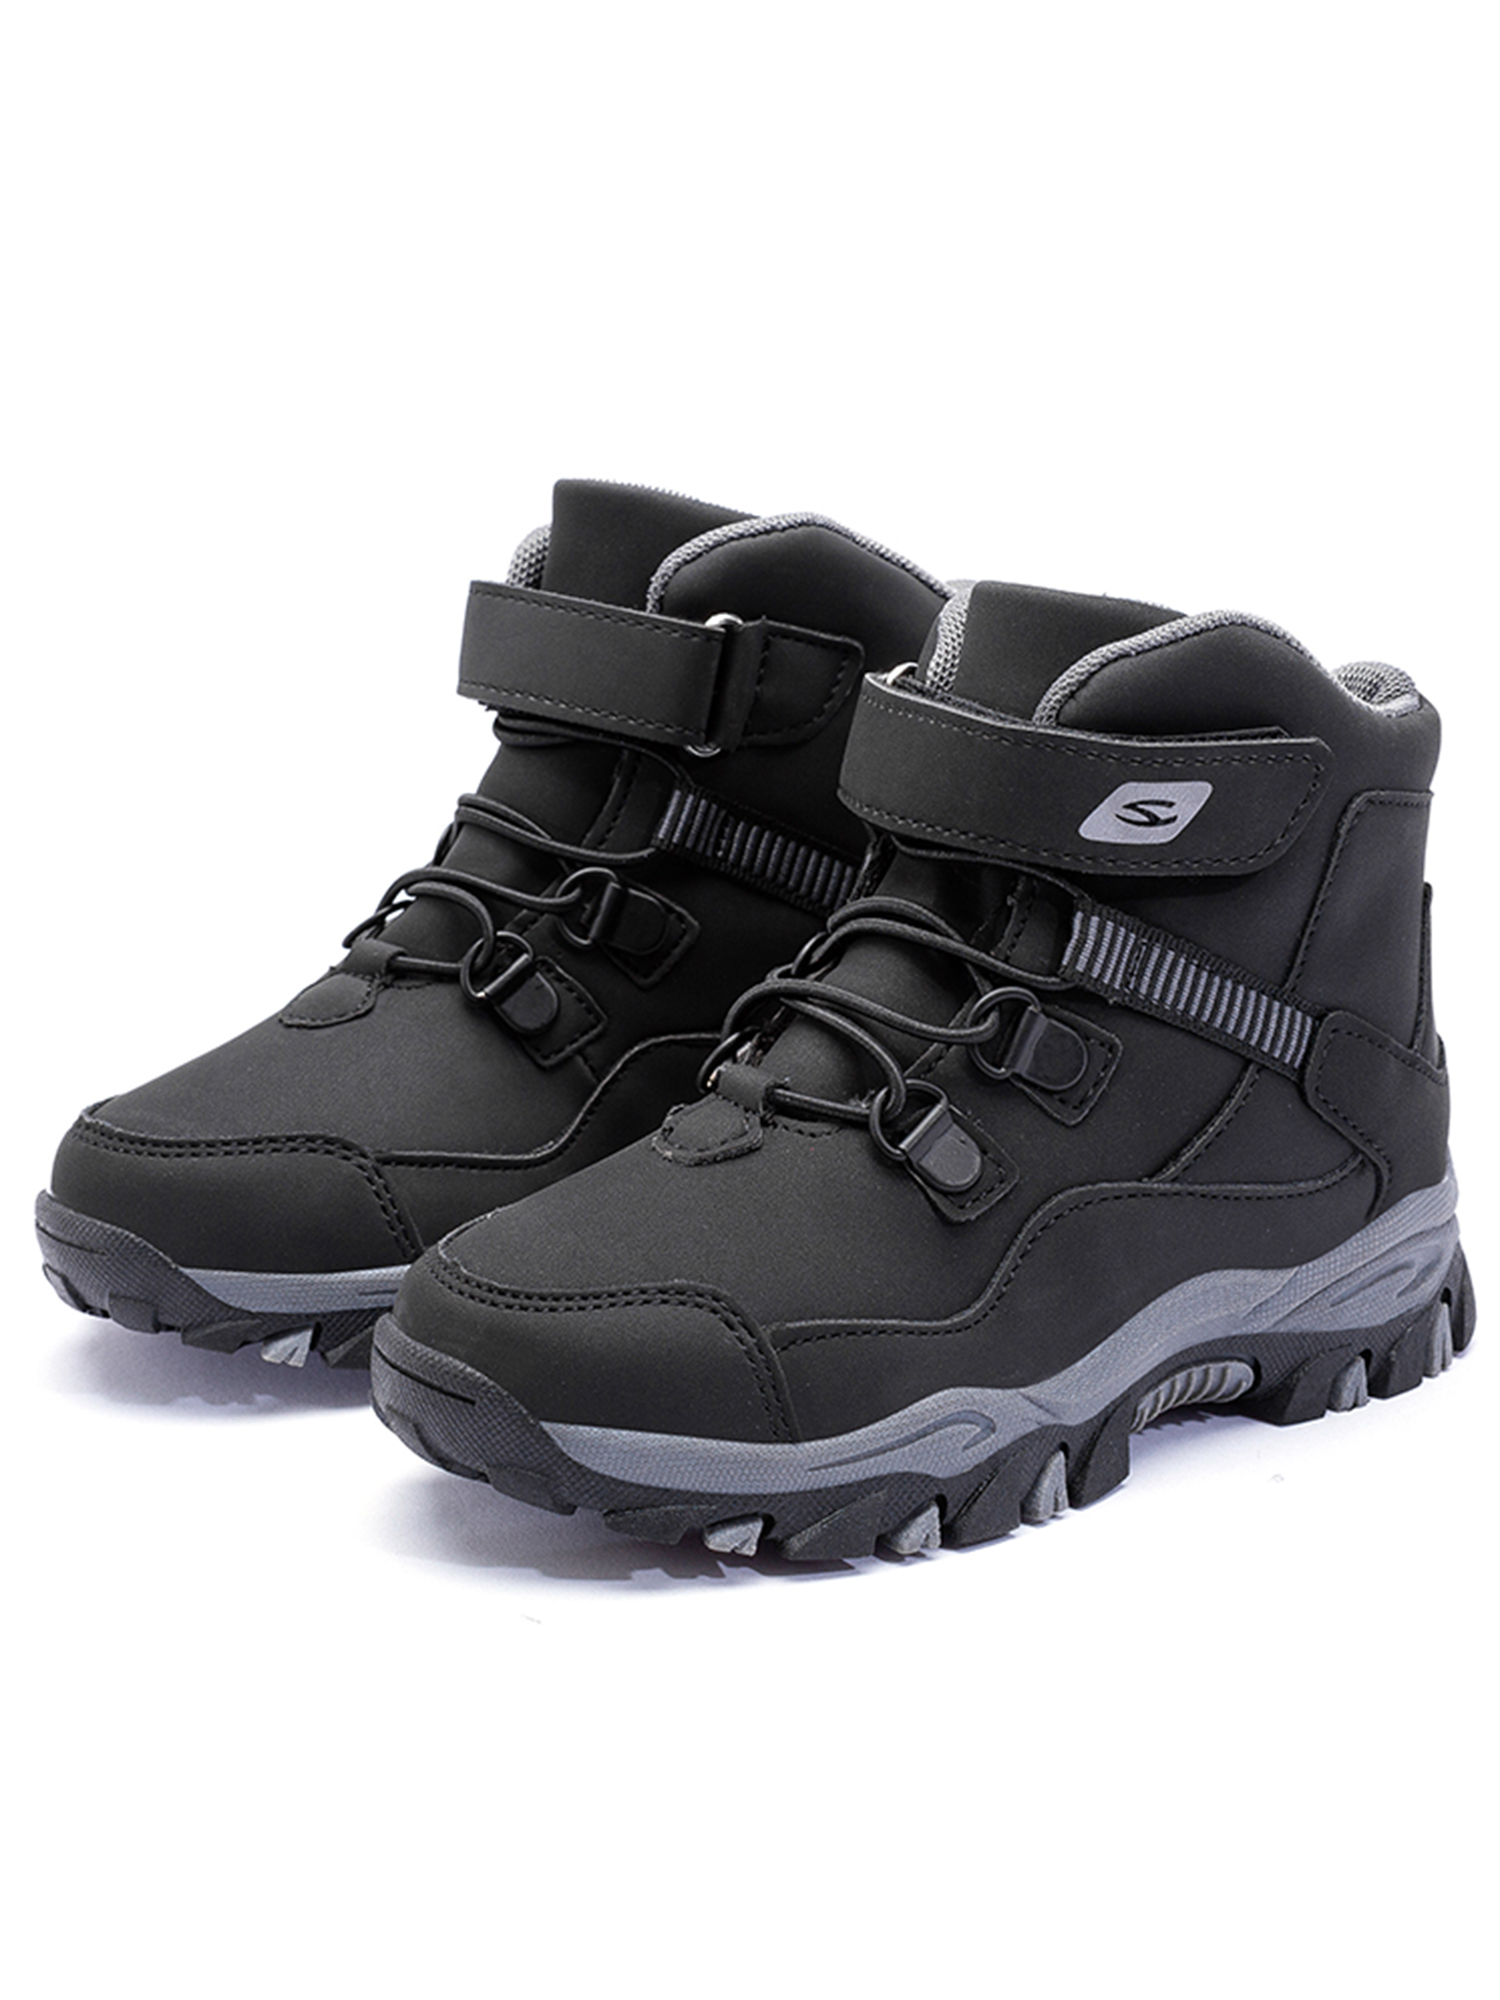 Fashion Children Boots Waterproof Winter Autumn Boys Casual Shoes Kids Anti-slip Sports Shoes Sneakers - image 1 of 7